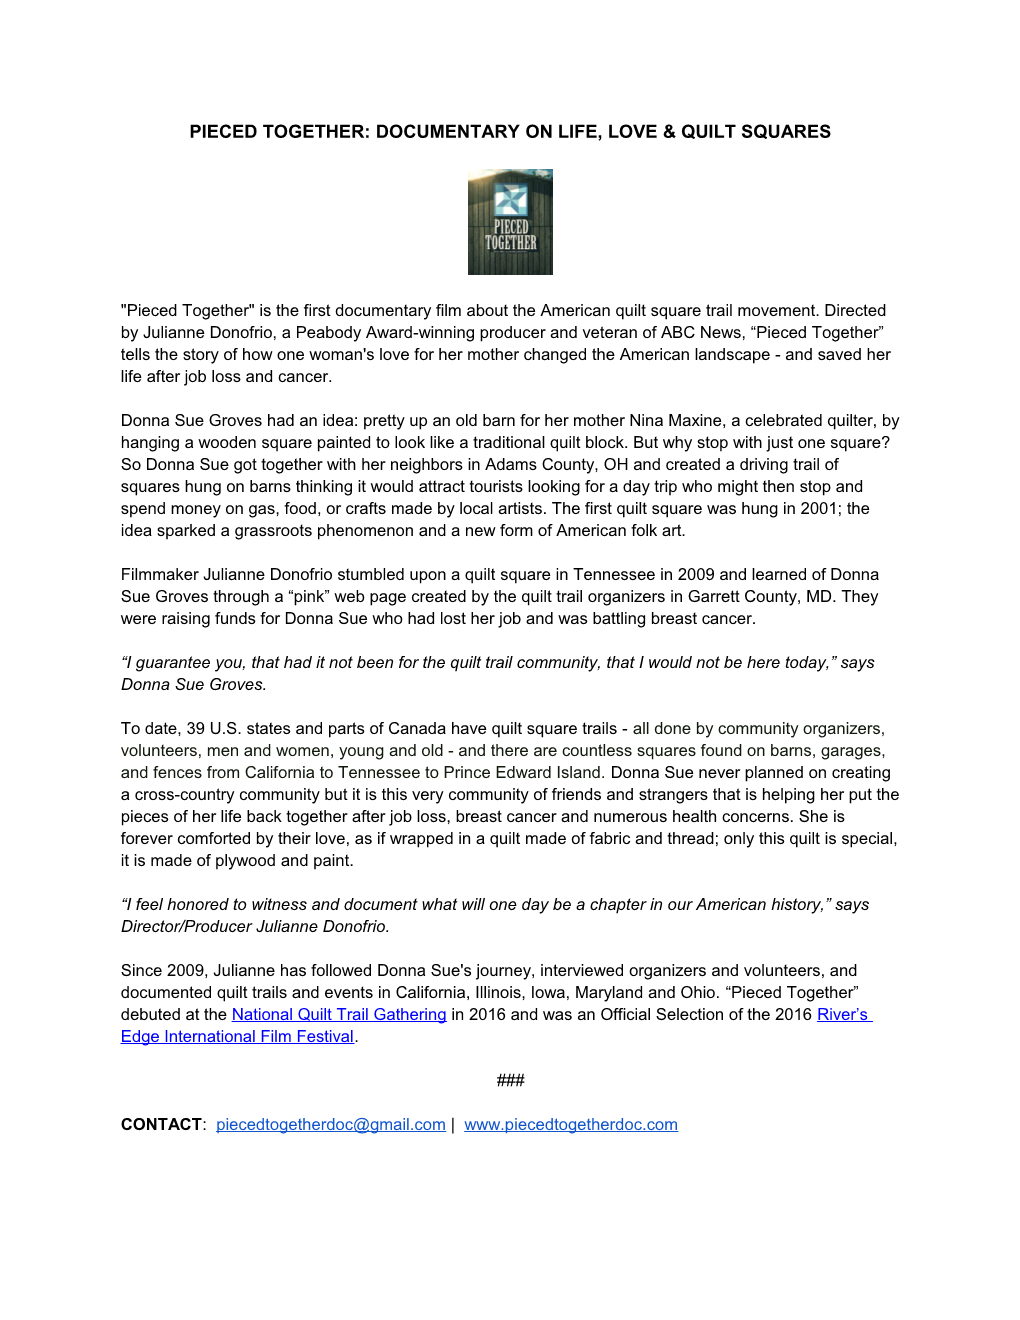 Pieced Together Press Release